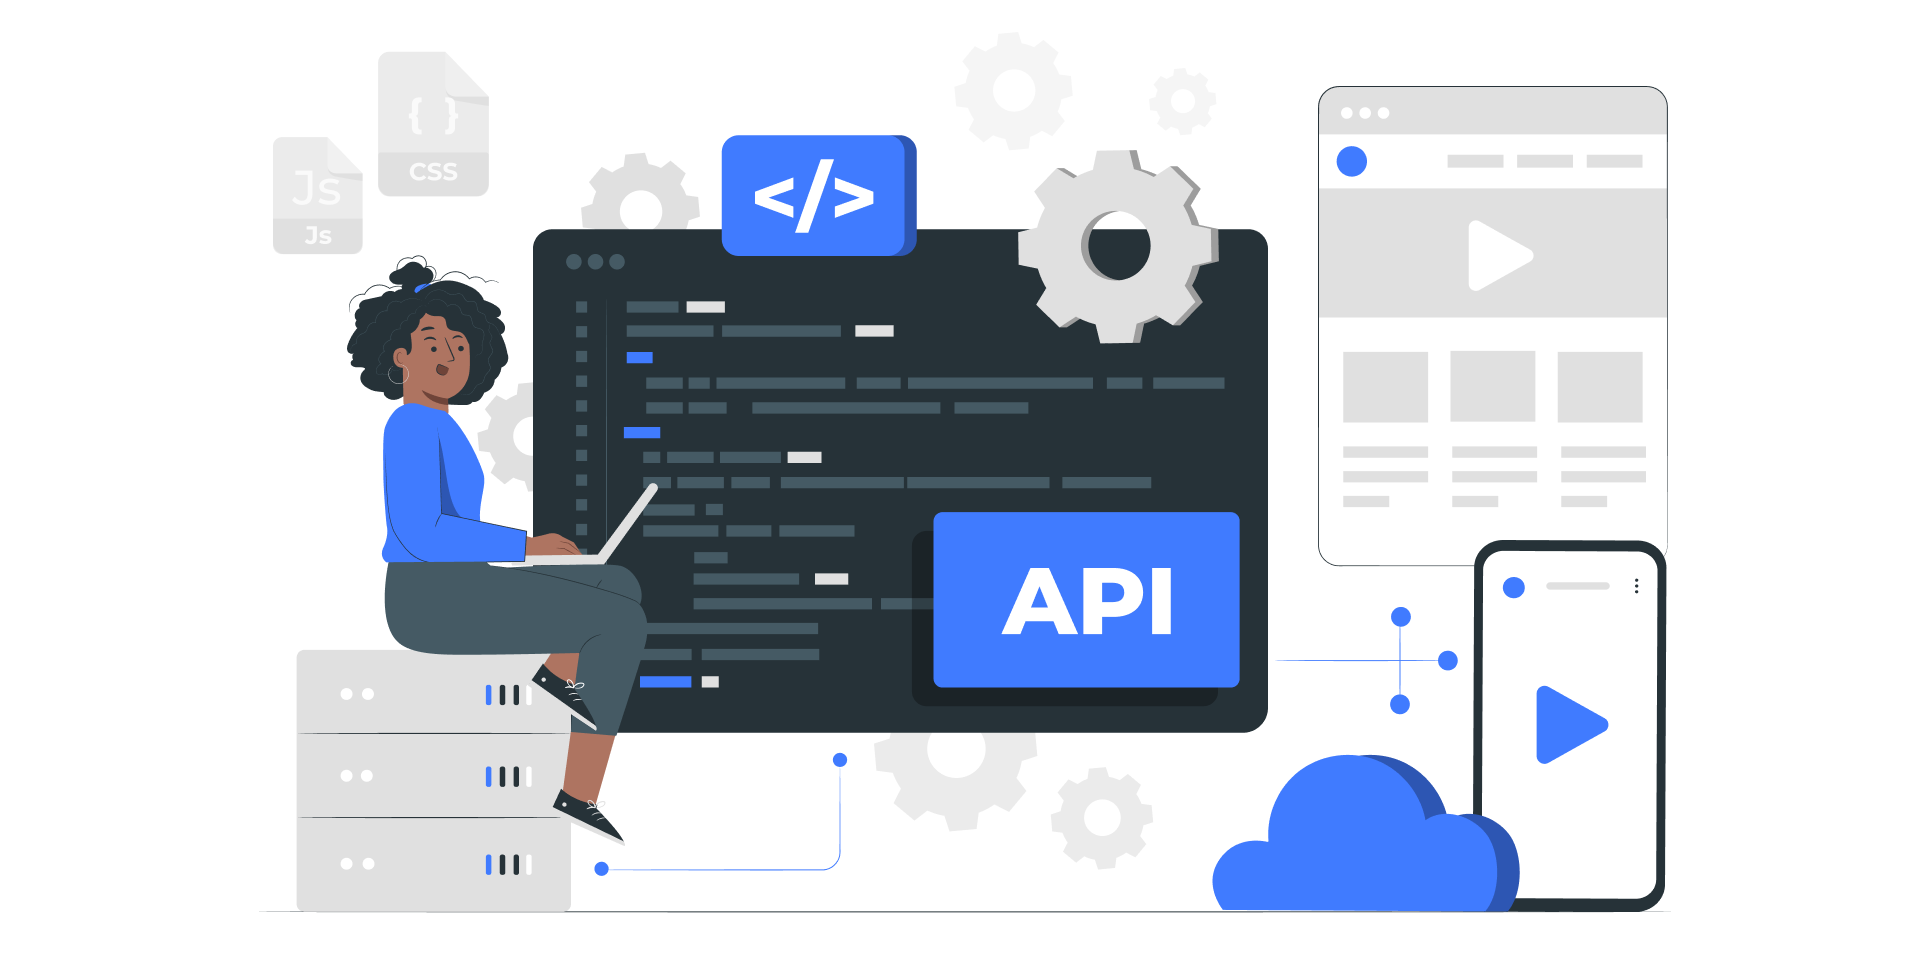 Why Mobile APIs are Preferred Over Developing Features from the Beginning